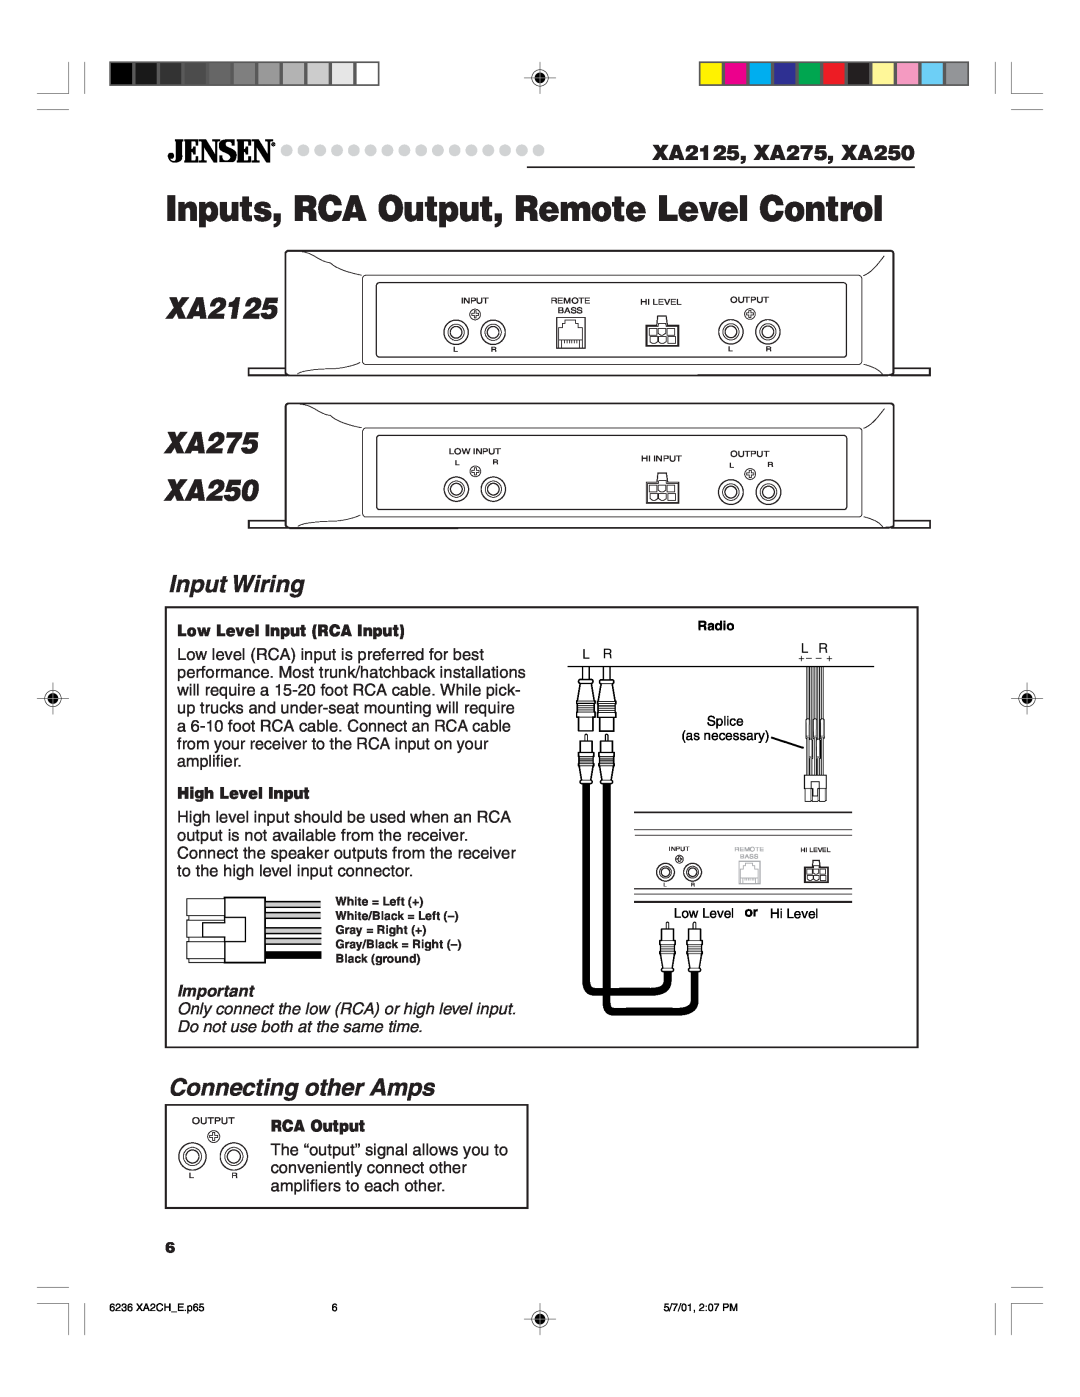 Jensen Tools warranty Inputs, RCA Output, Remote Level Control, XA2125 XA275 XA250, Input Wiring, Connecting other Amps 